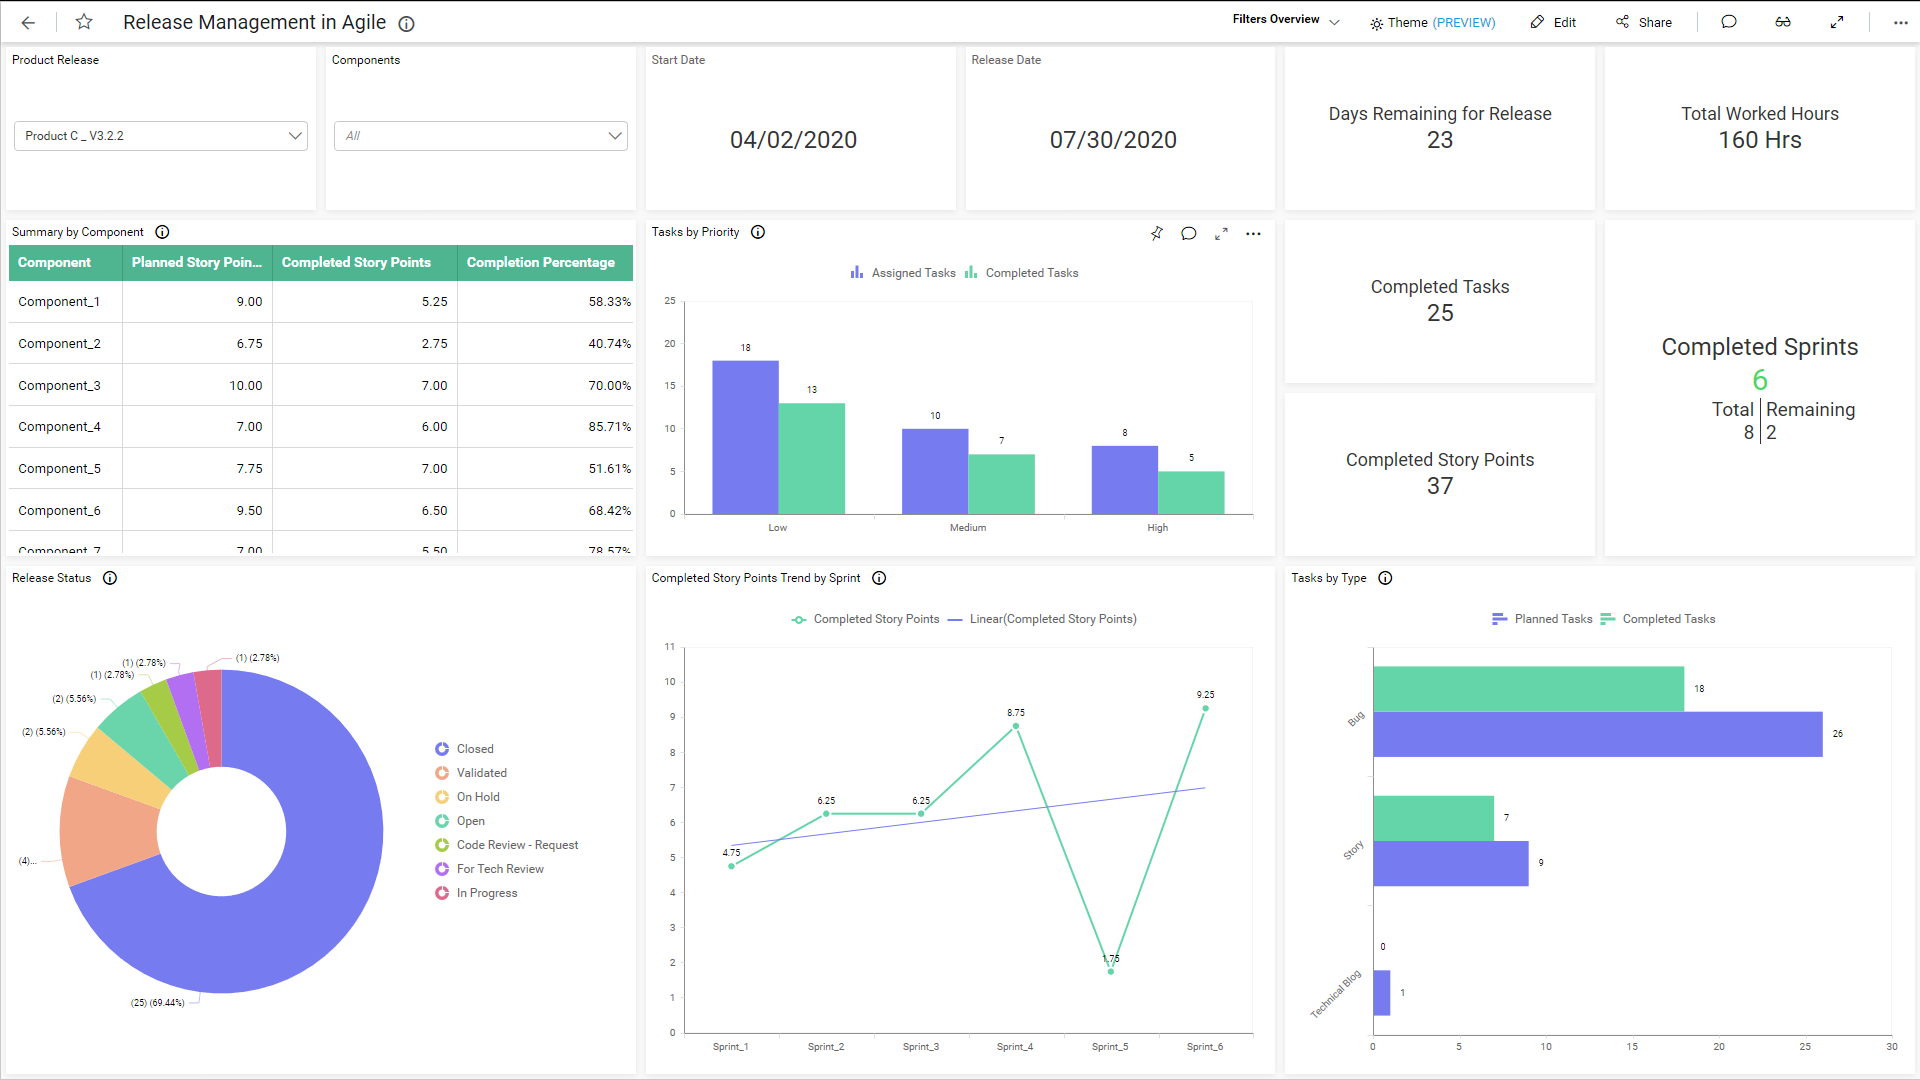 Release Management in Agile Dashboard